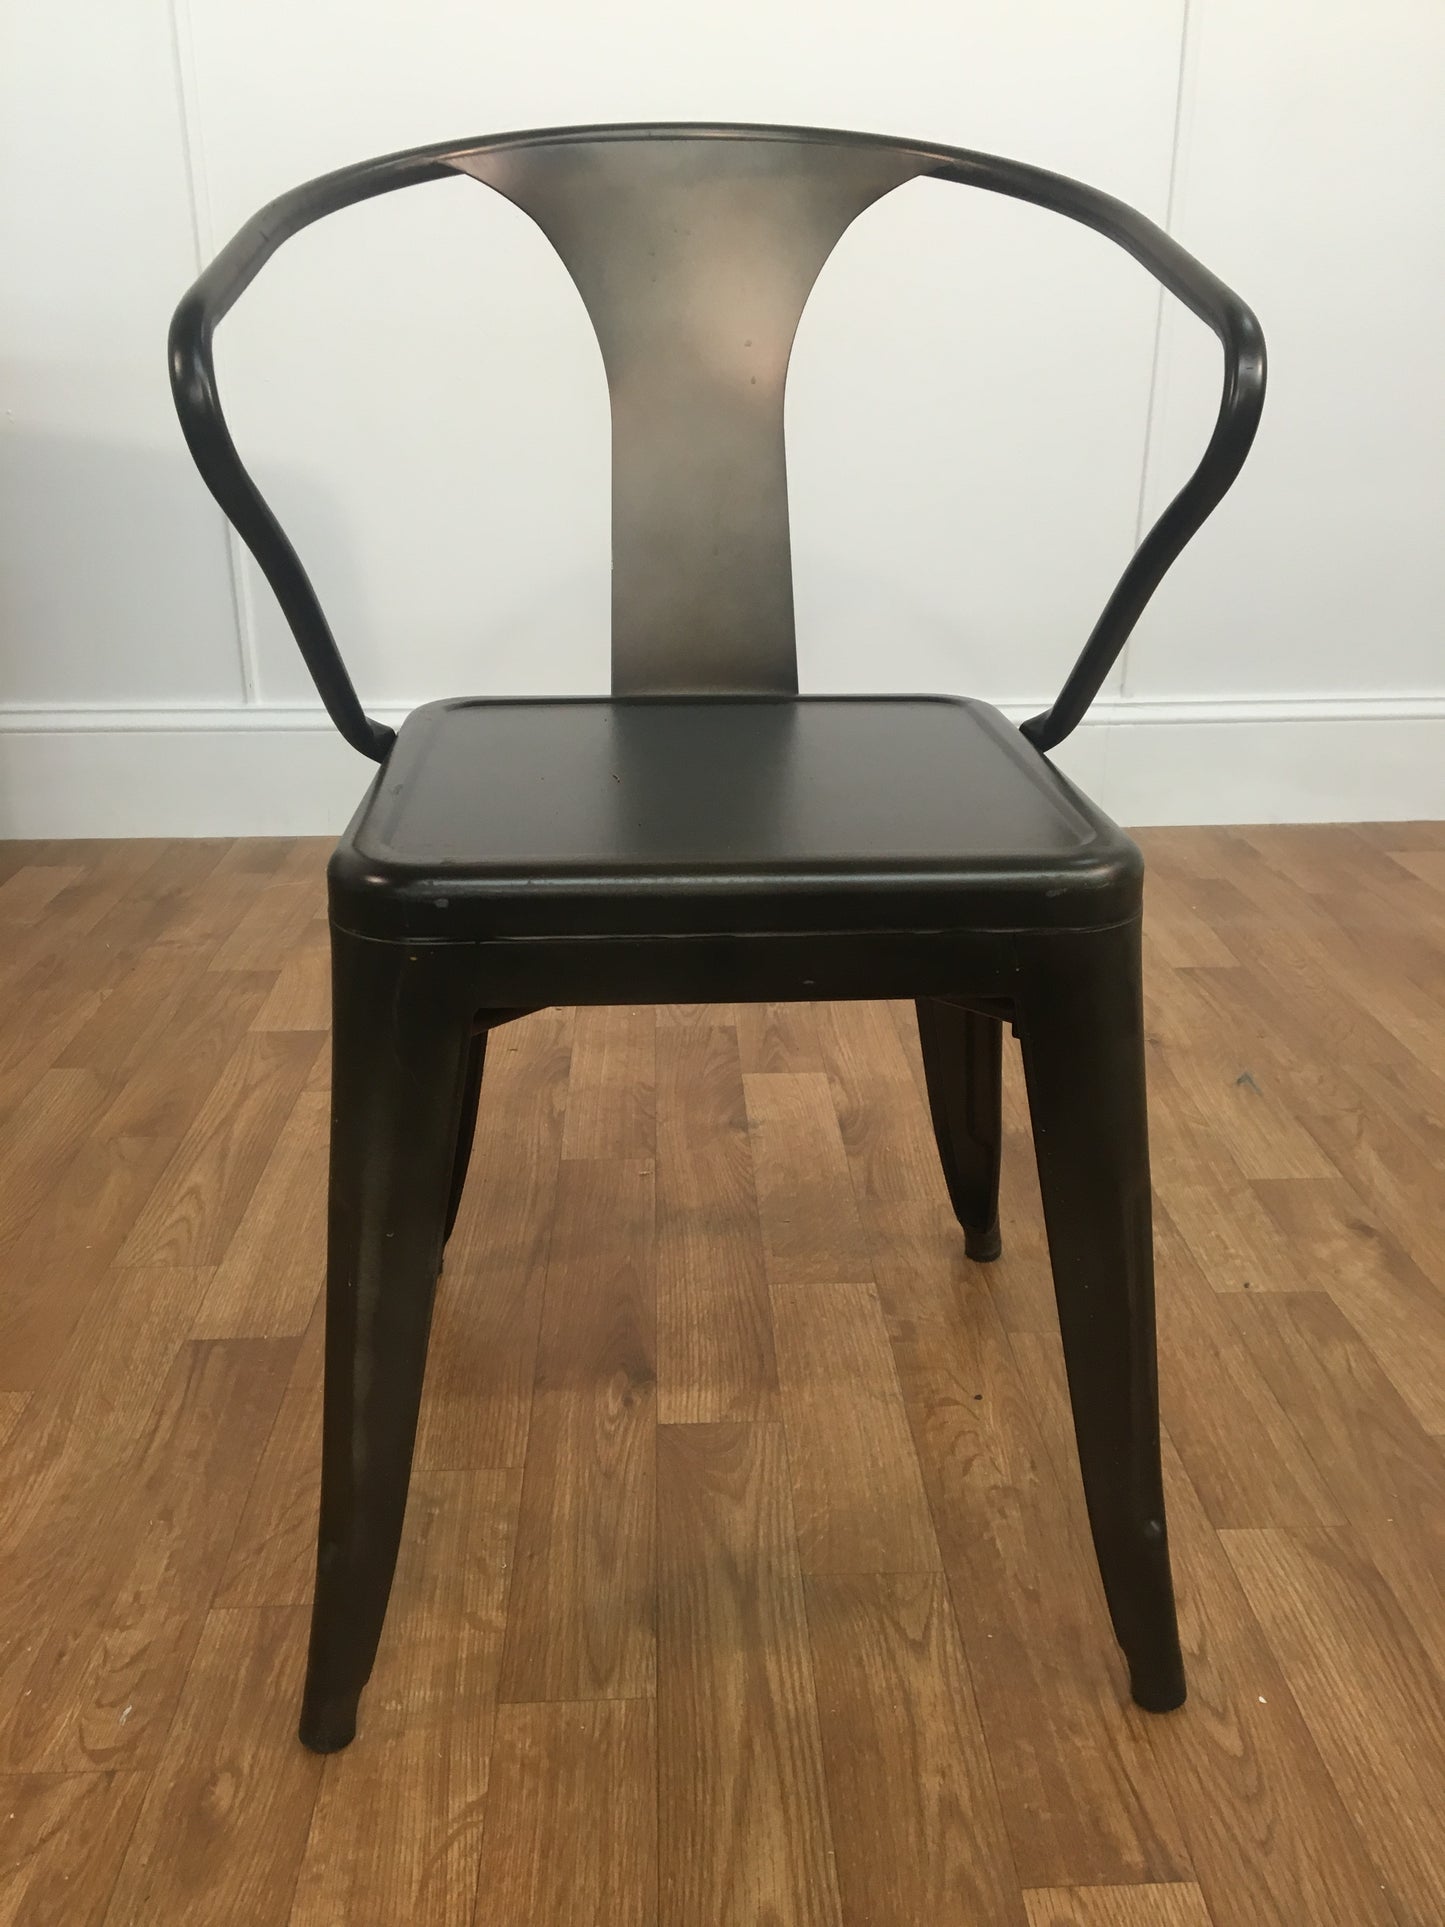 BRONZE CHAIR WITH OPEN BACK AND ARMS